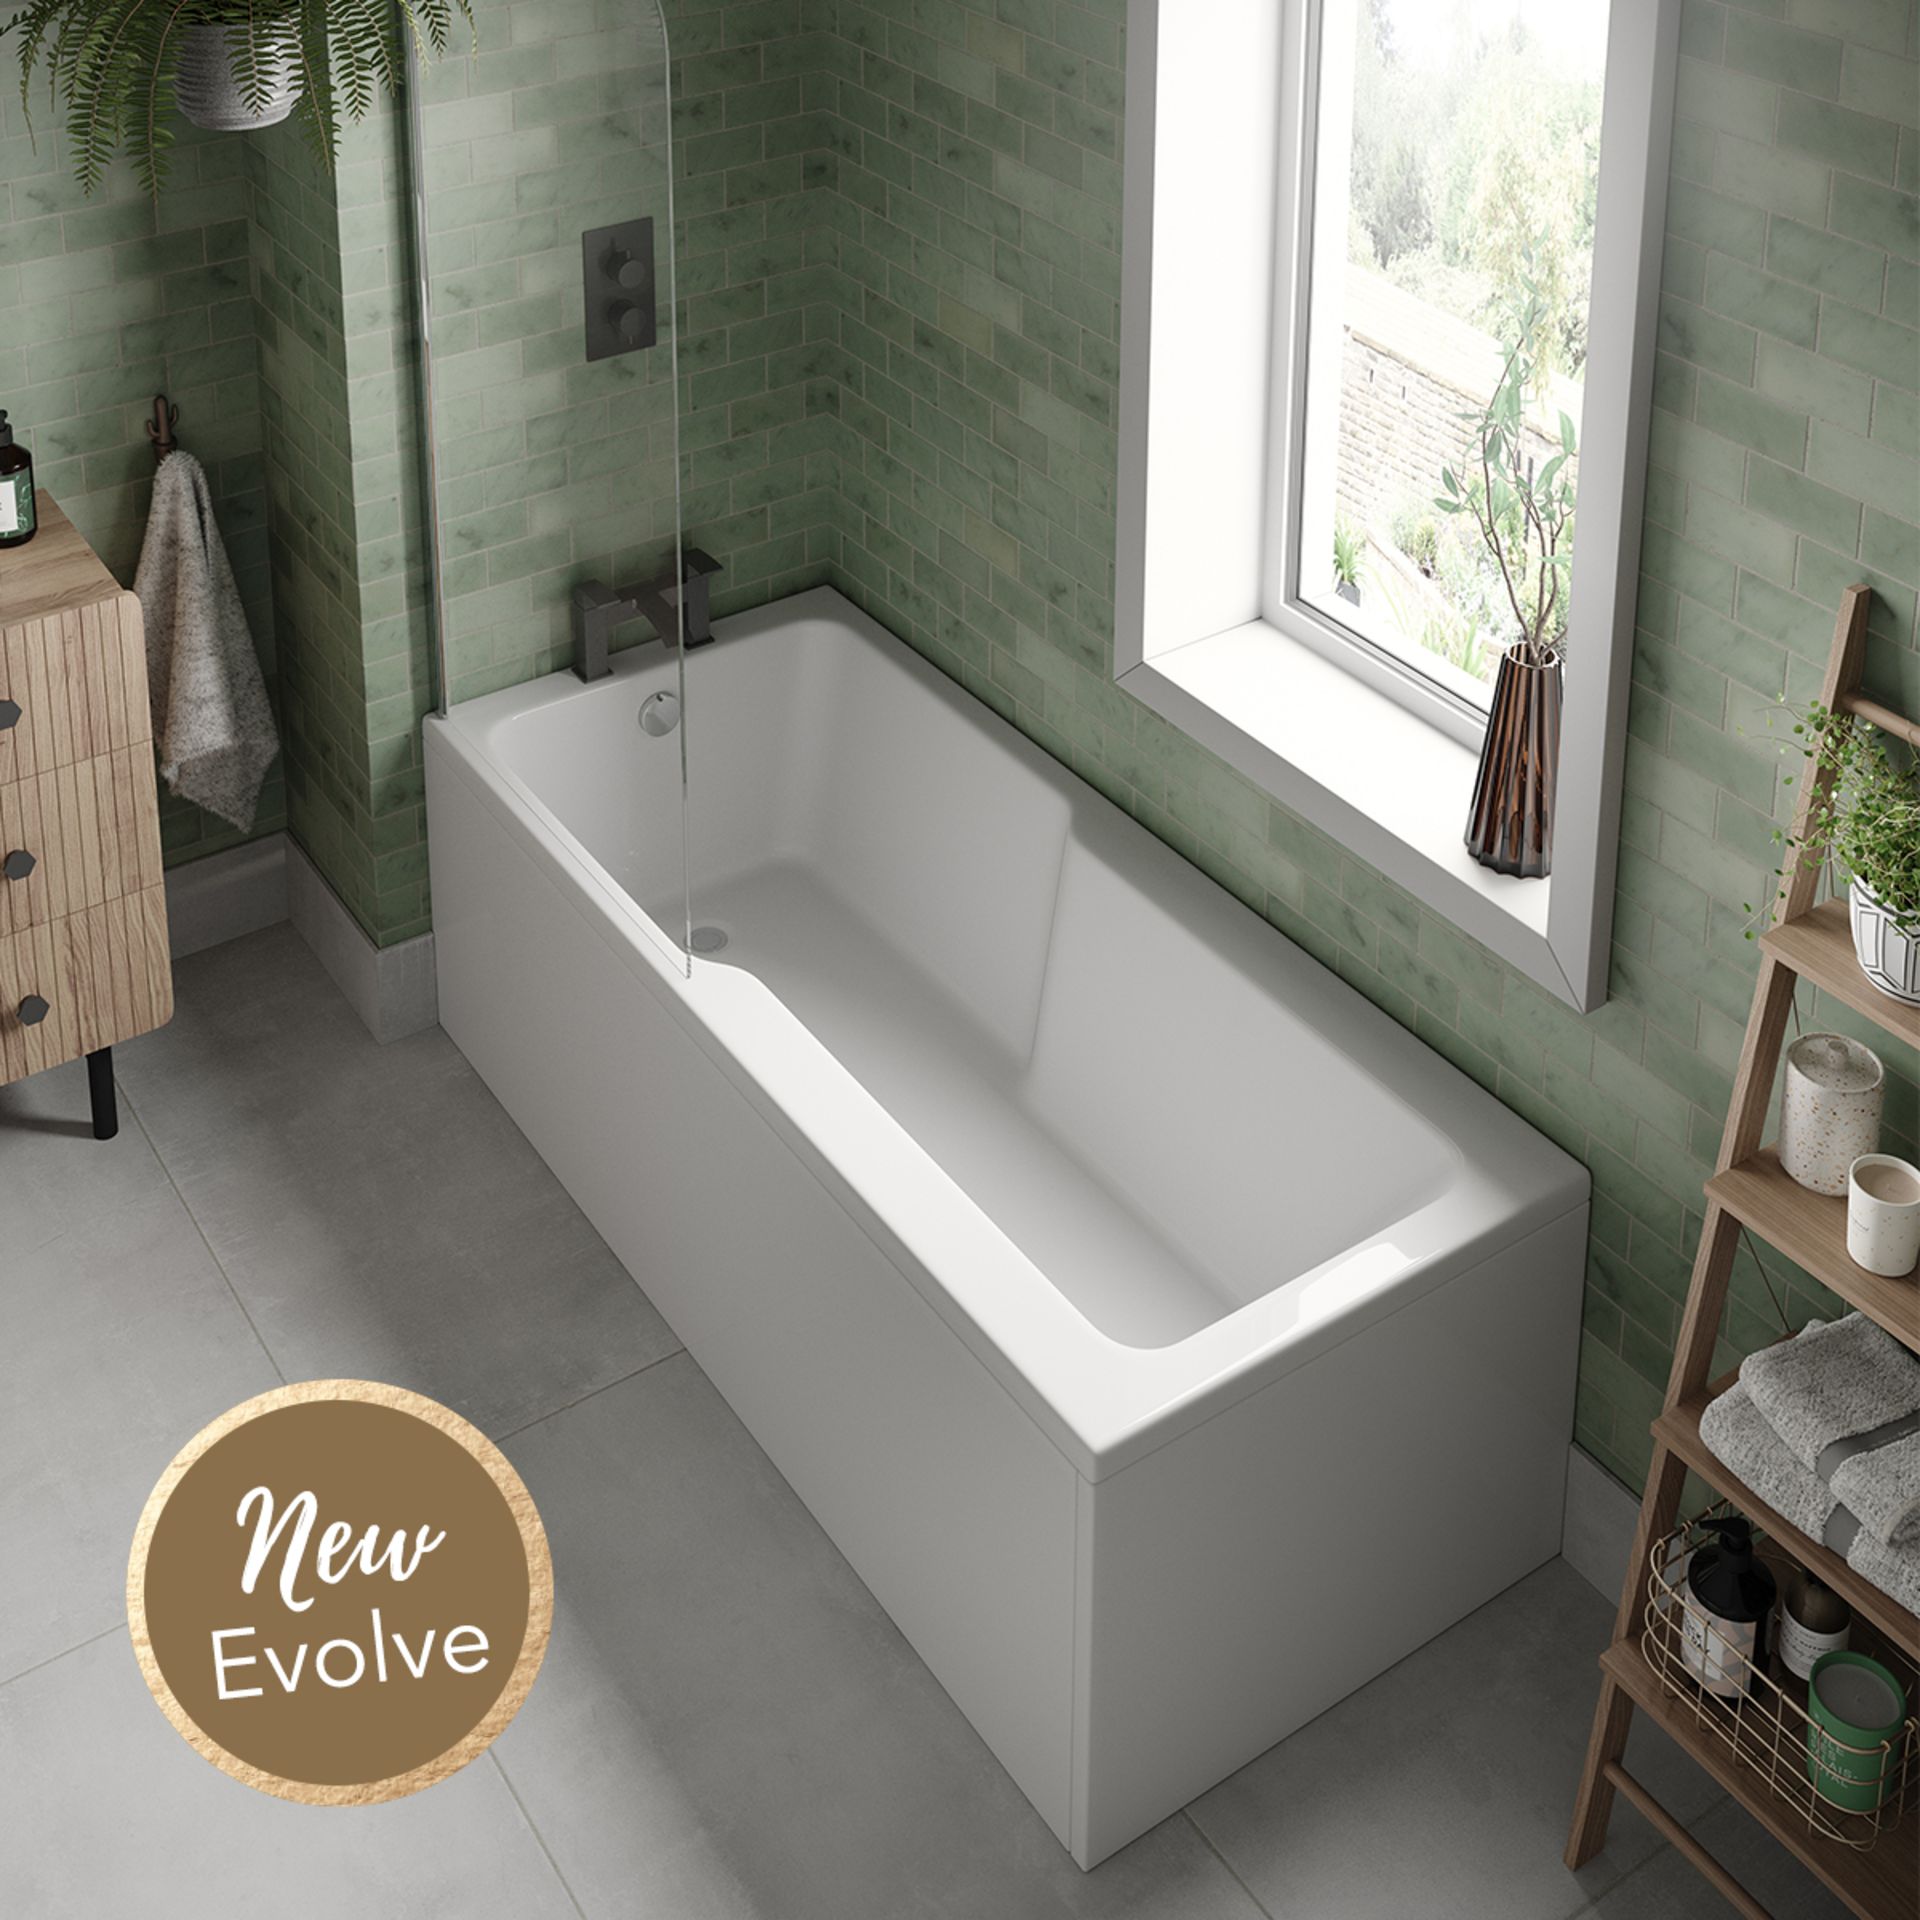 New (H5) Synergy Evolve 1700 x 750mm Premier Shower Bath. RRP £520.00. Clean Structural Lines ... - Image 2 of 2